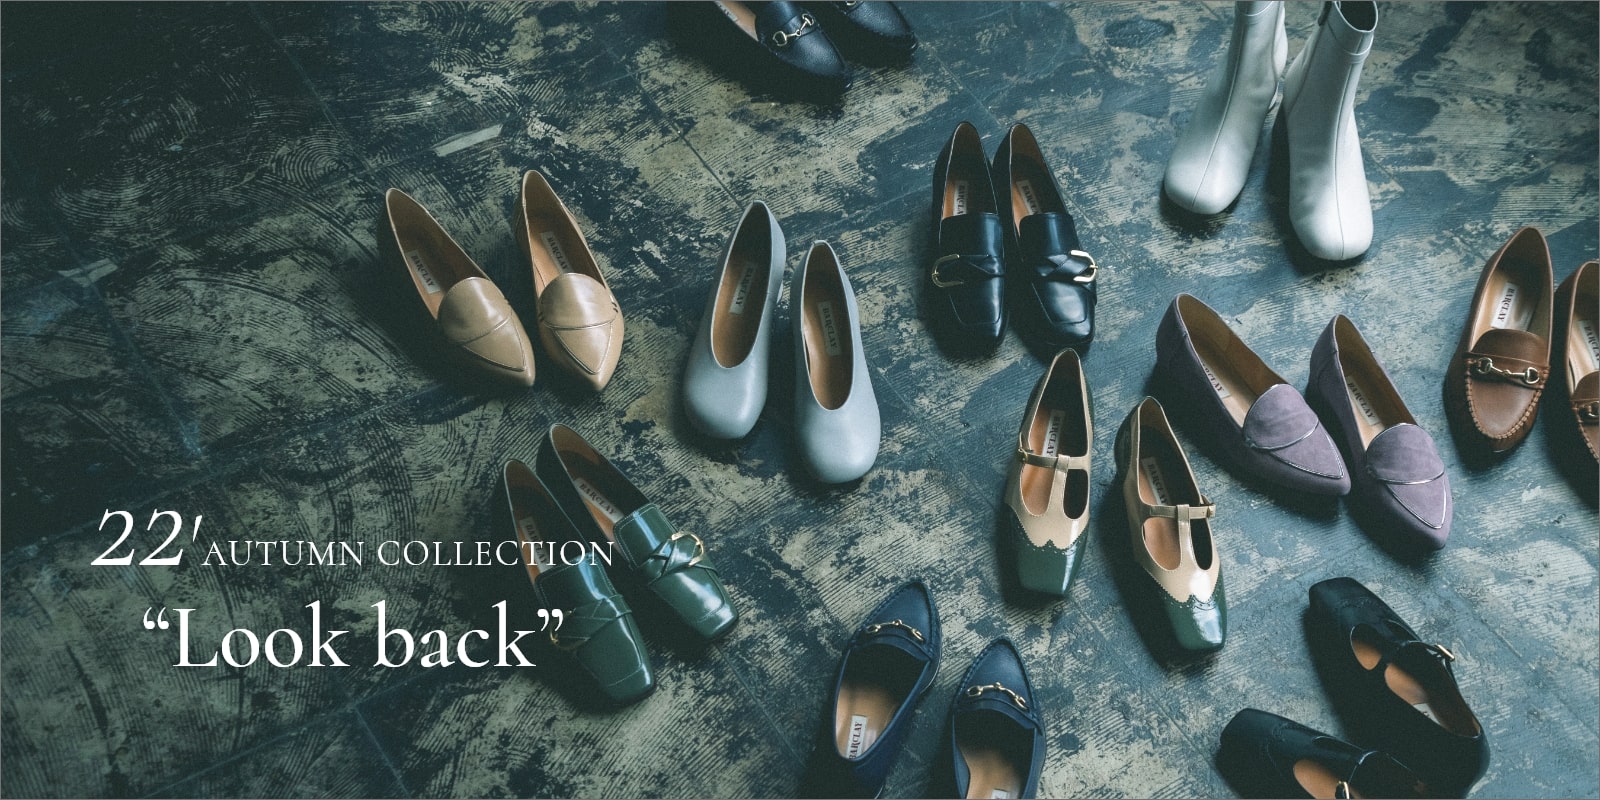 22SS AUTMUN COLLECTION “Look back”